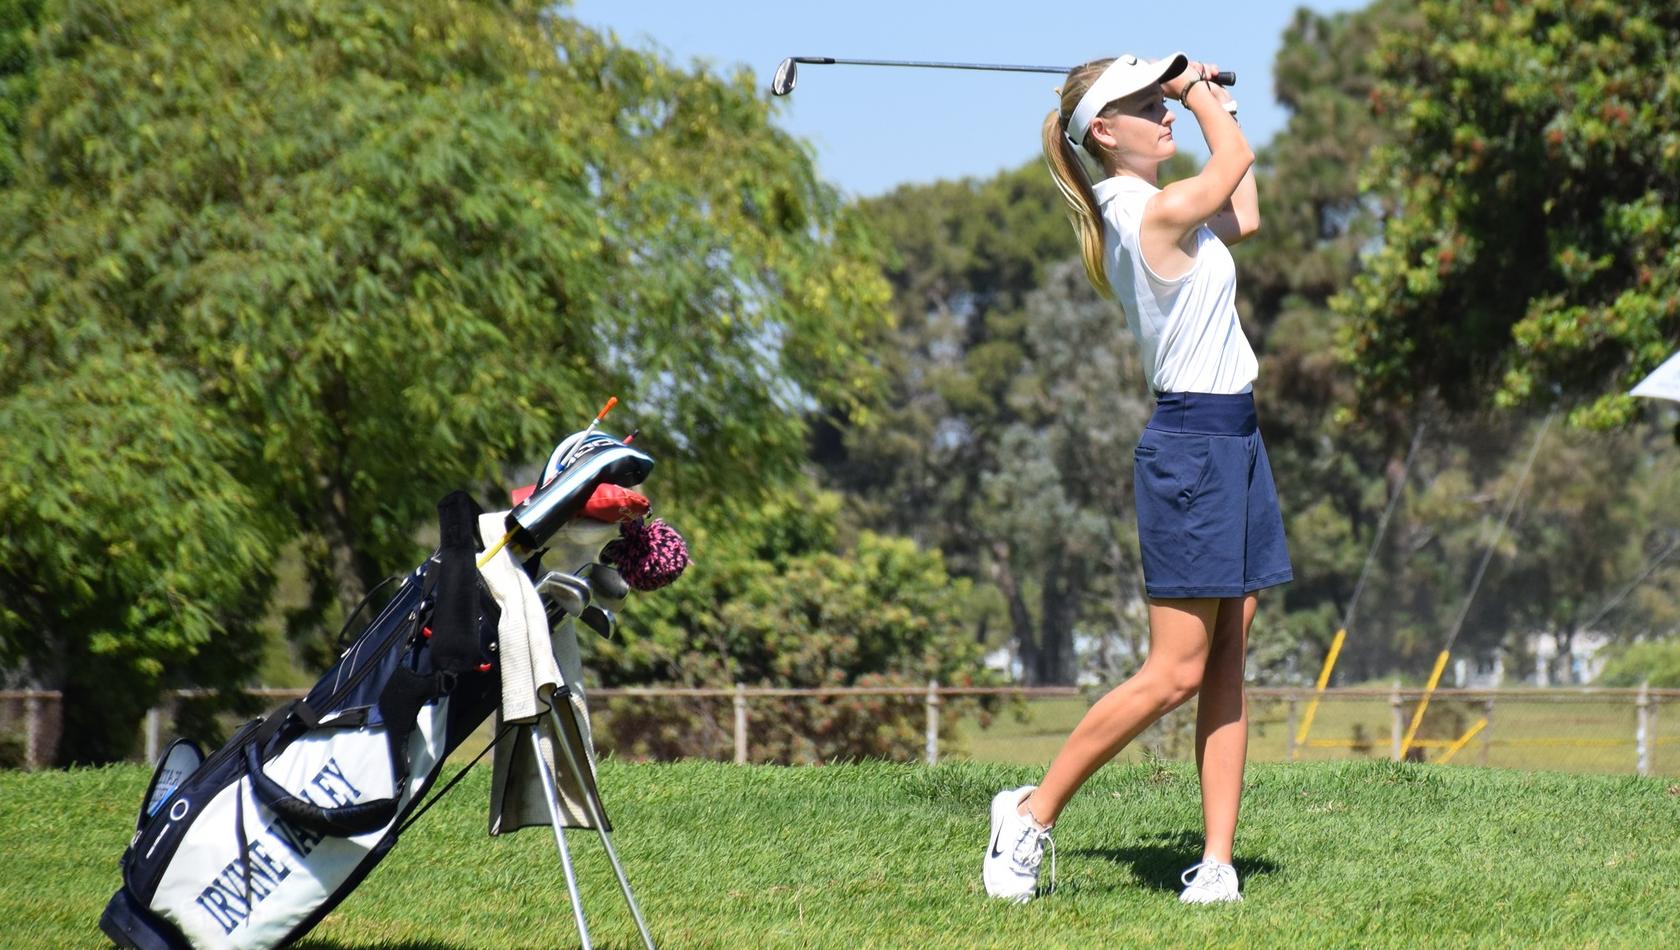 Golfer Katie Stribling cards 76, leads OEC Champs after day one